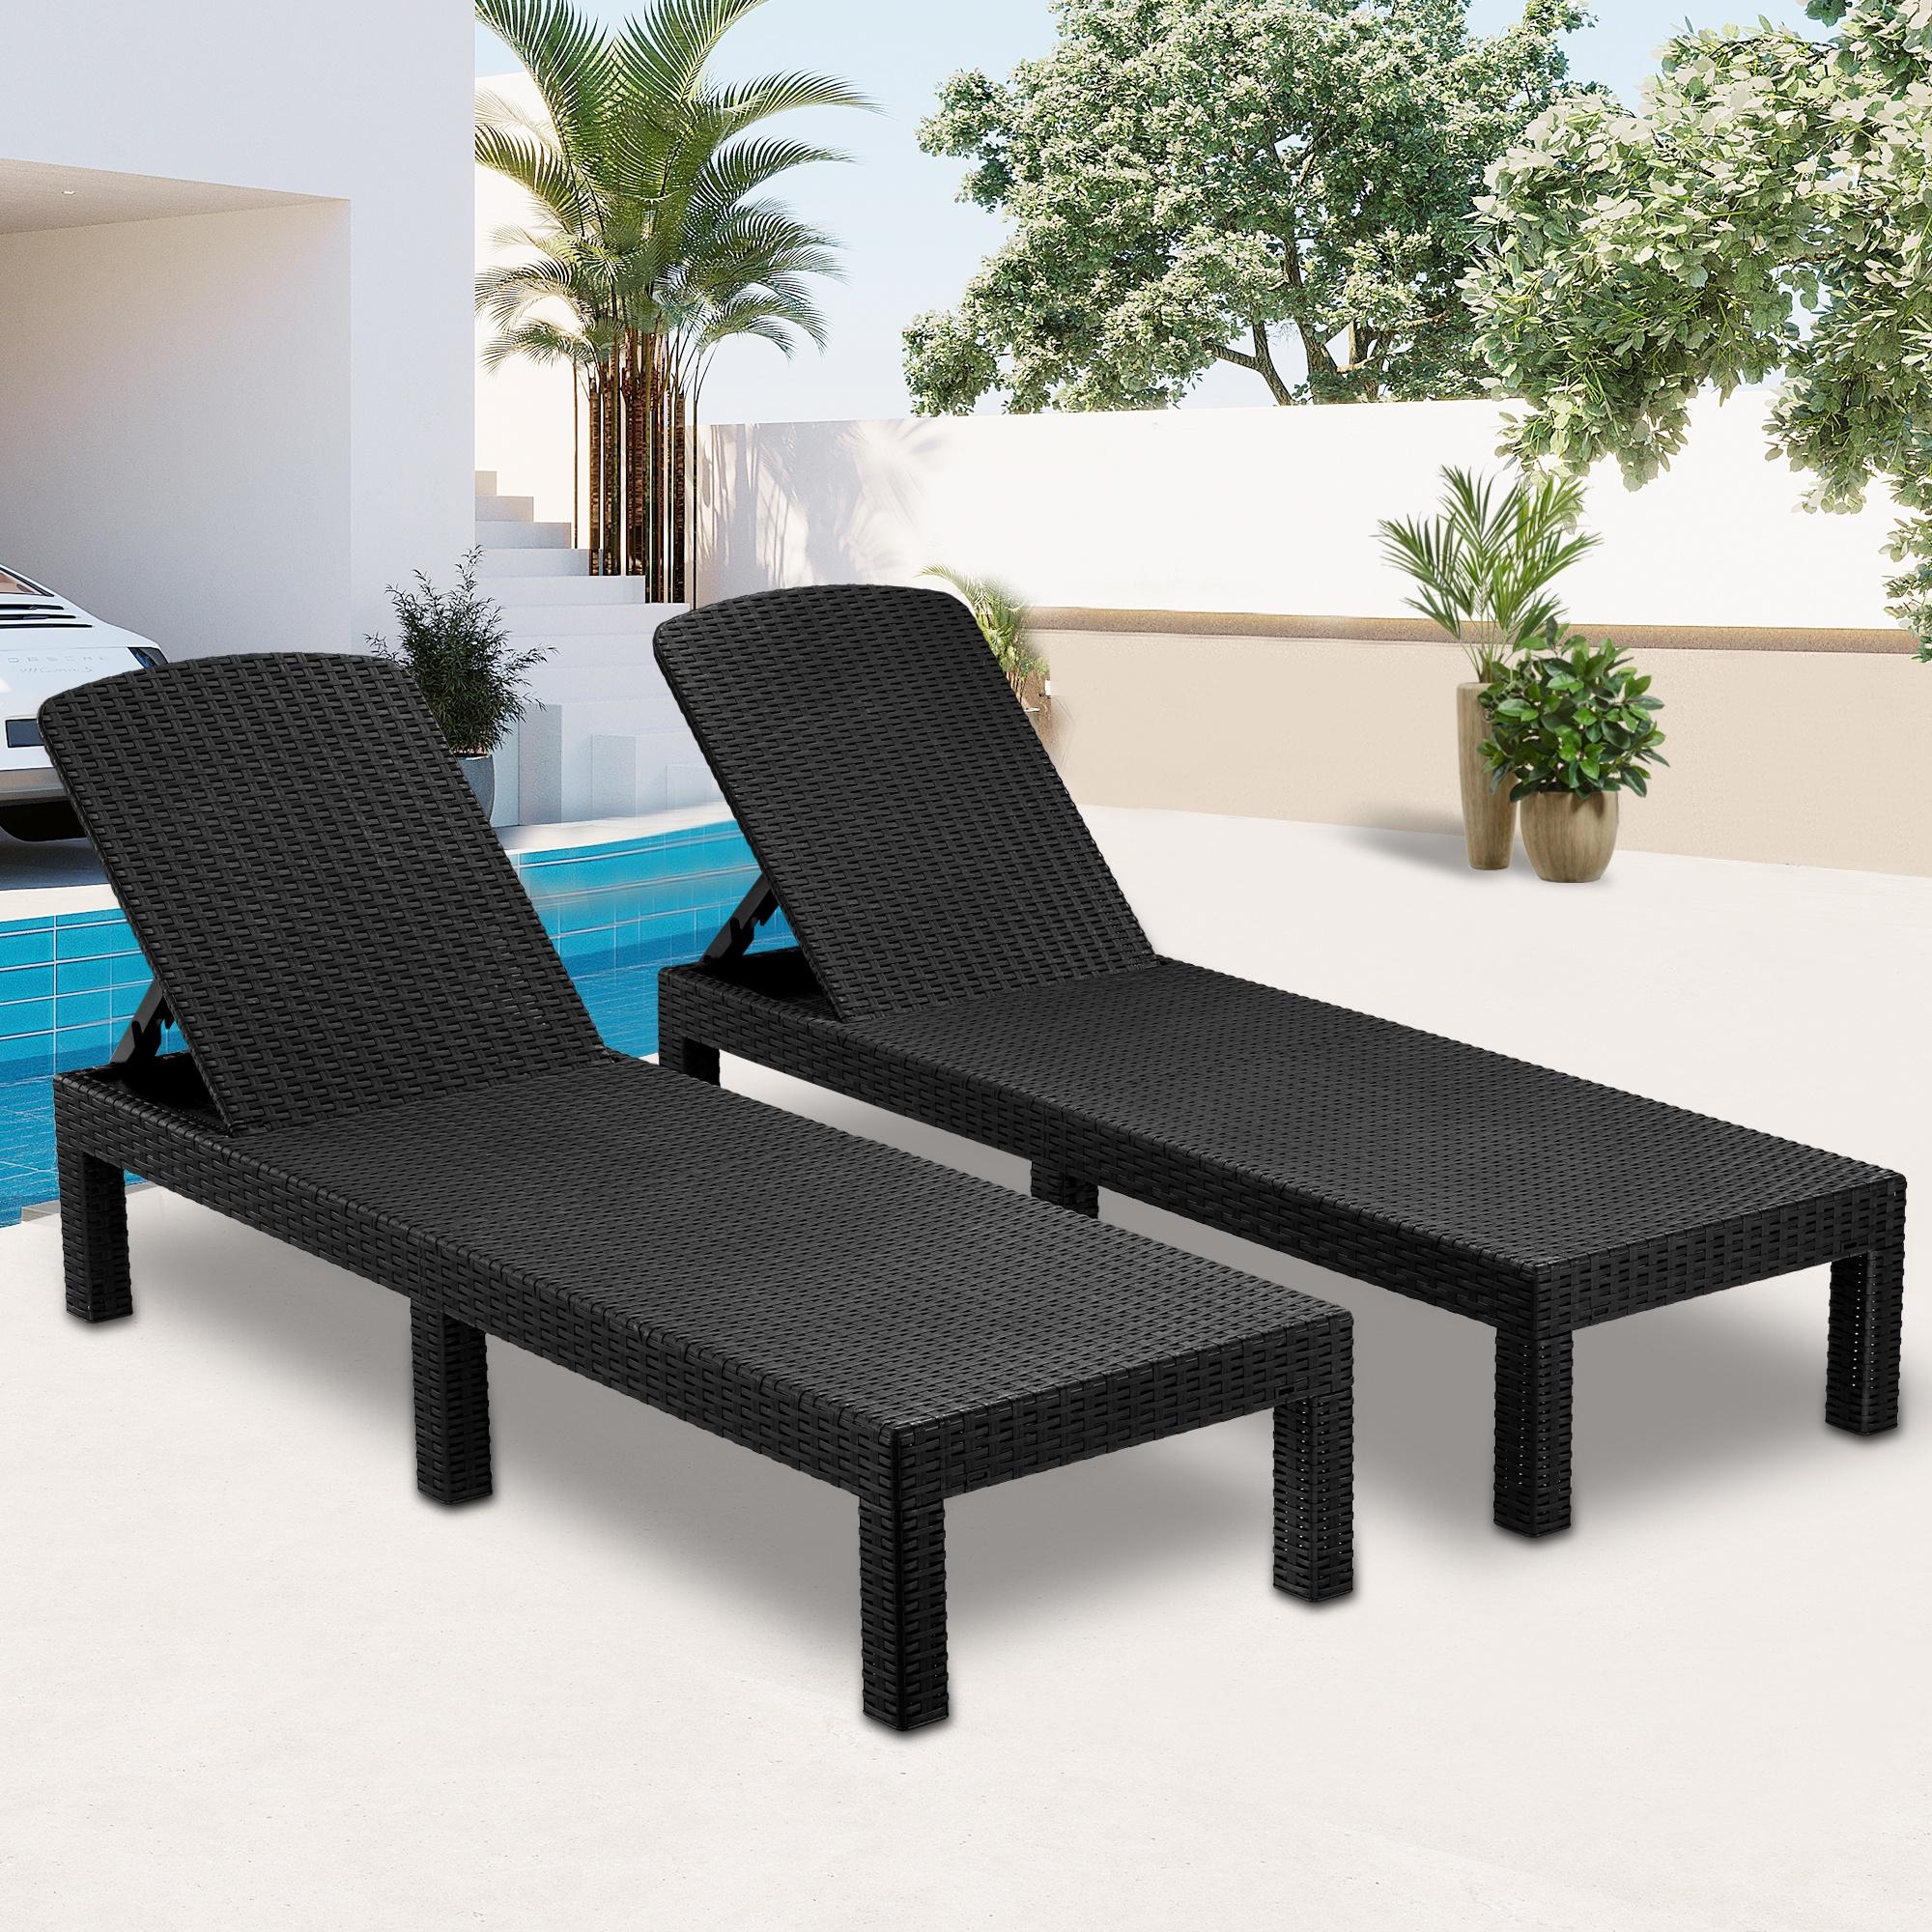 Patio Lounge Chairs Set of 2, Outdoor Chaise Lounge Chair with 4 Backrest Angles, Patio Foldable Reclining Chair Furniture for Poolside, Deck, Backyard, Black - image 1 of 9